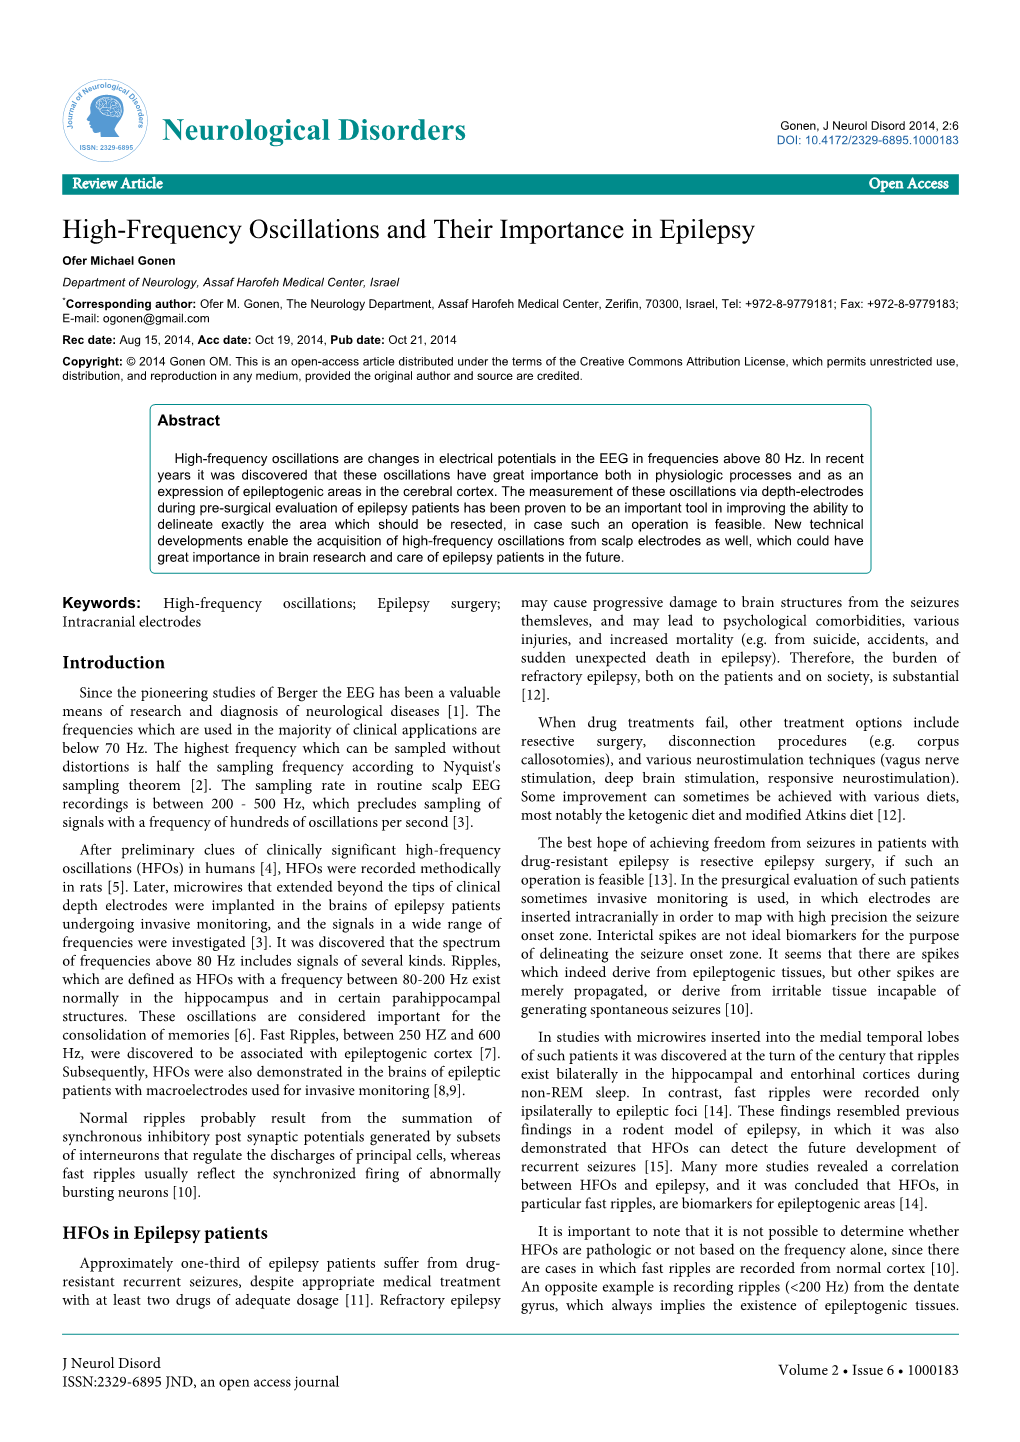 High-Frequency Oscillations and Their Importance in Epilepsy